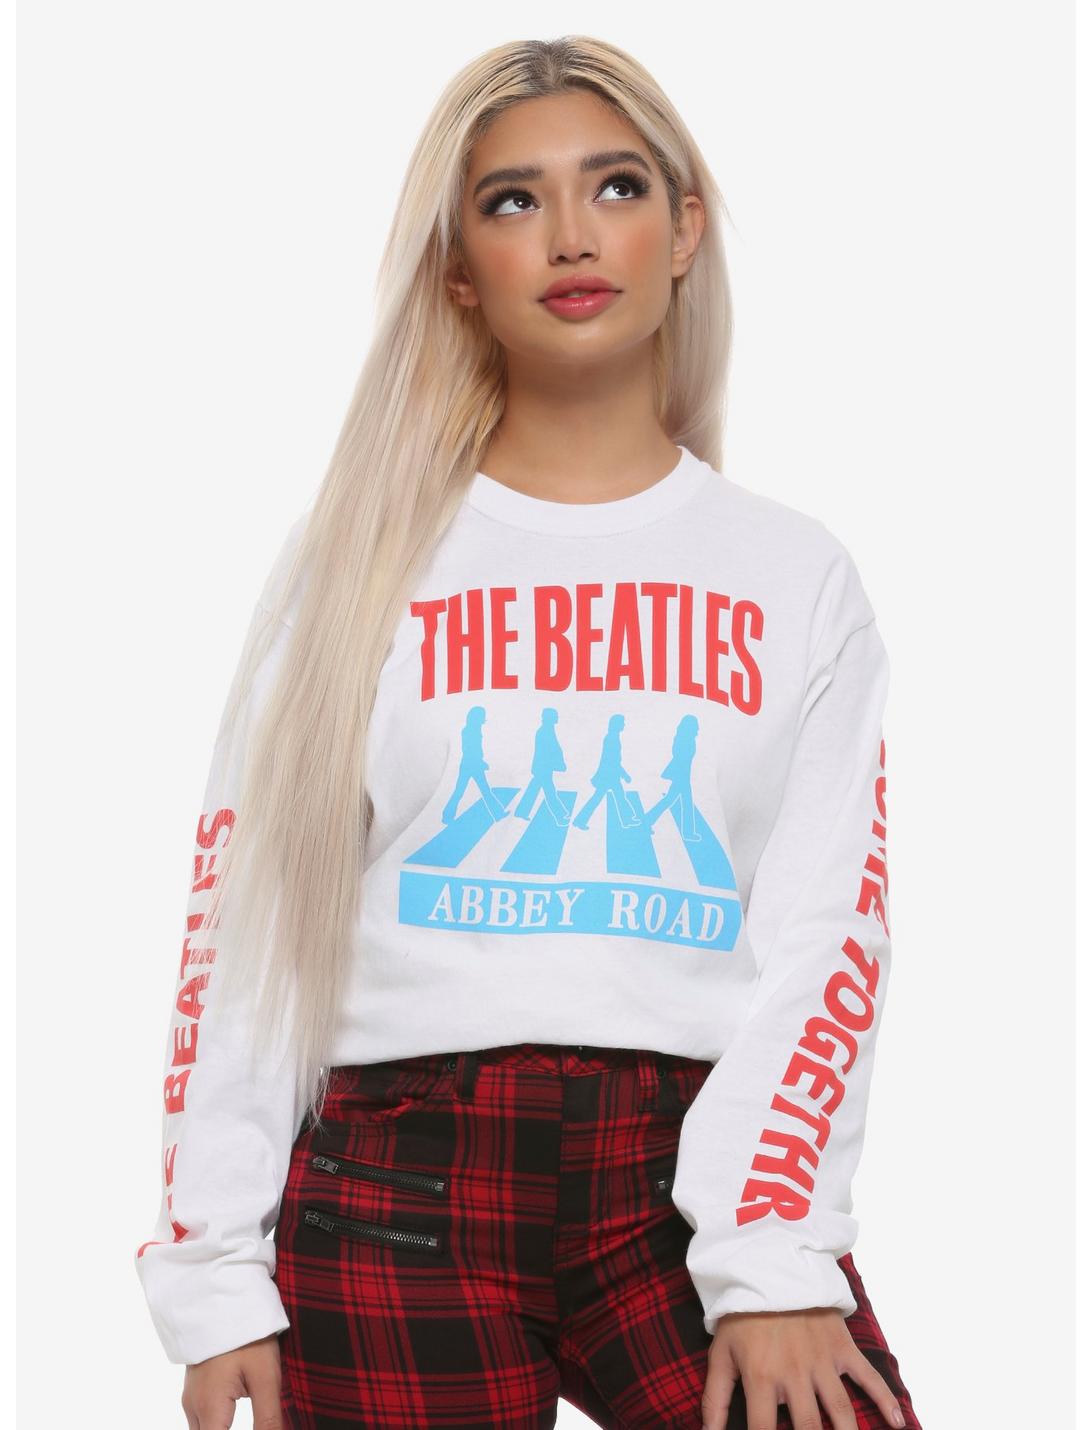 The Beatles Abbey Road Girls Long-Sleeve T-Shirt, WHITE, hi-res